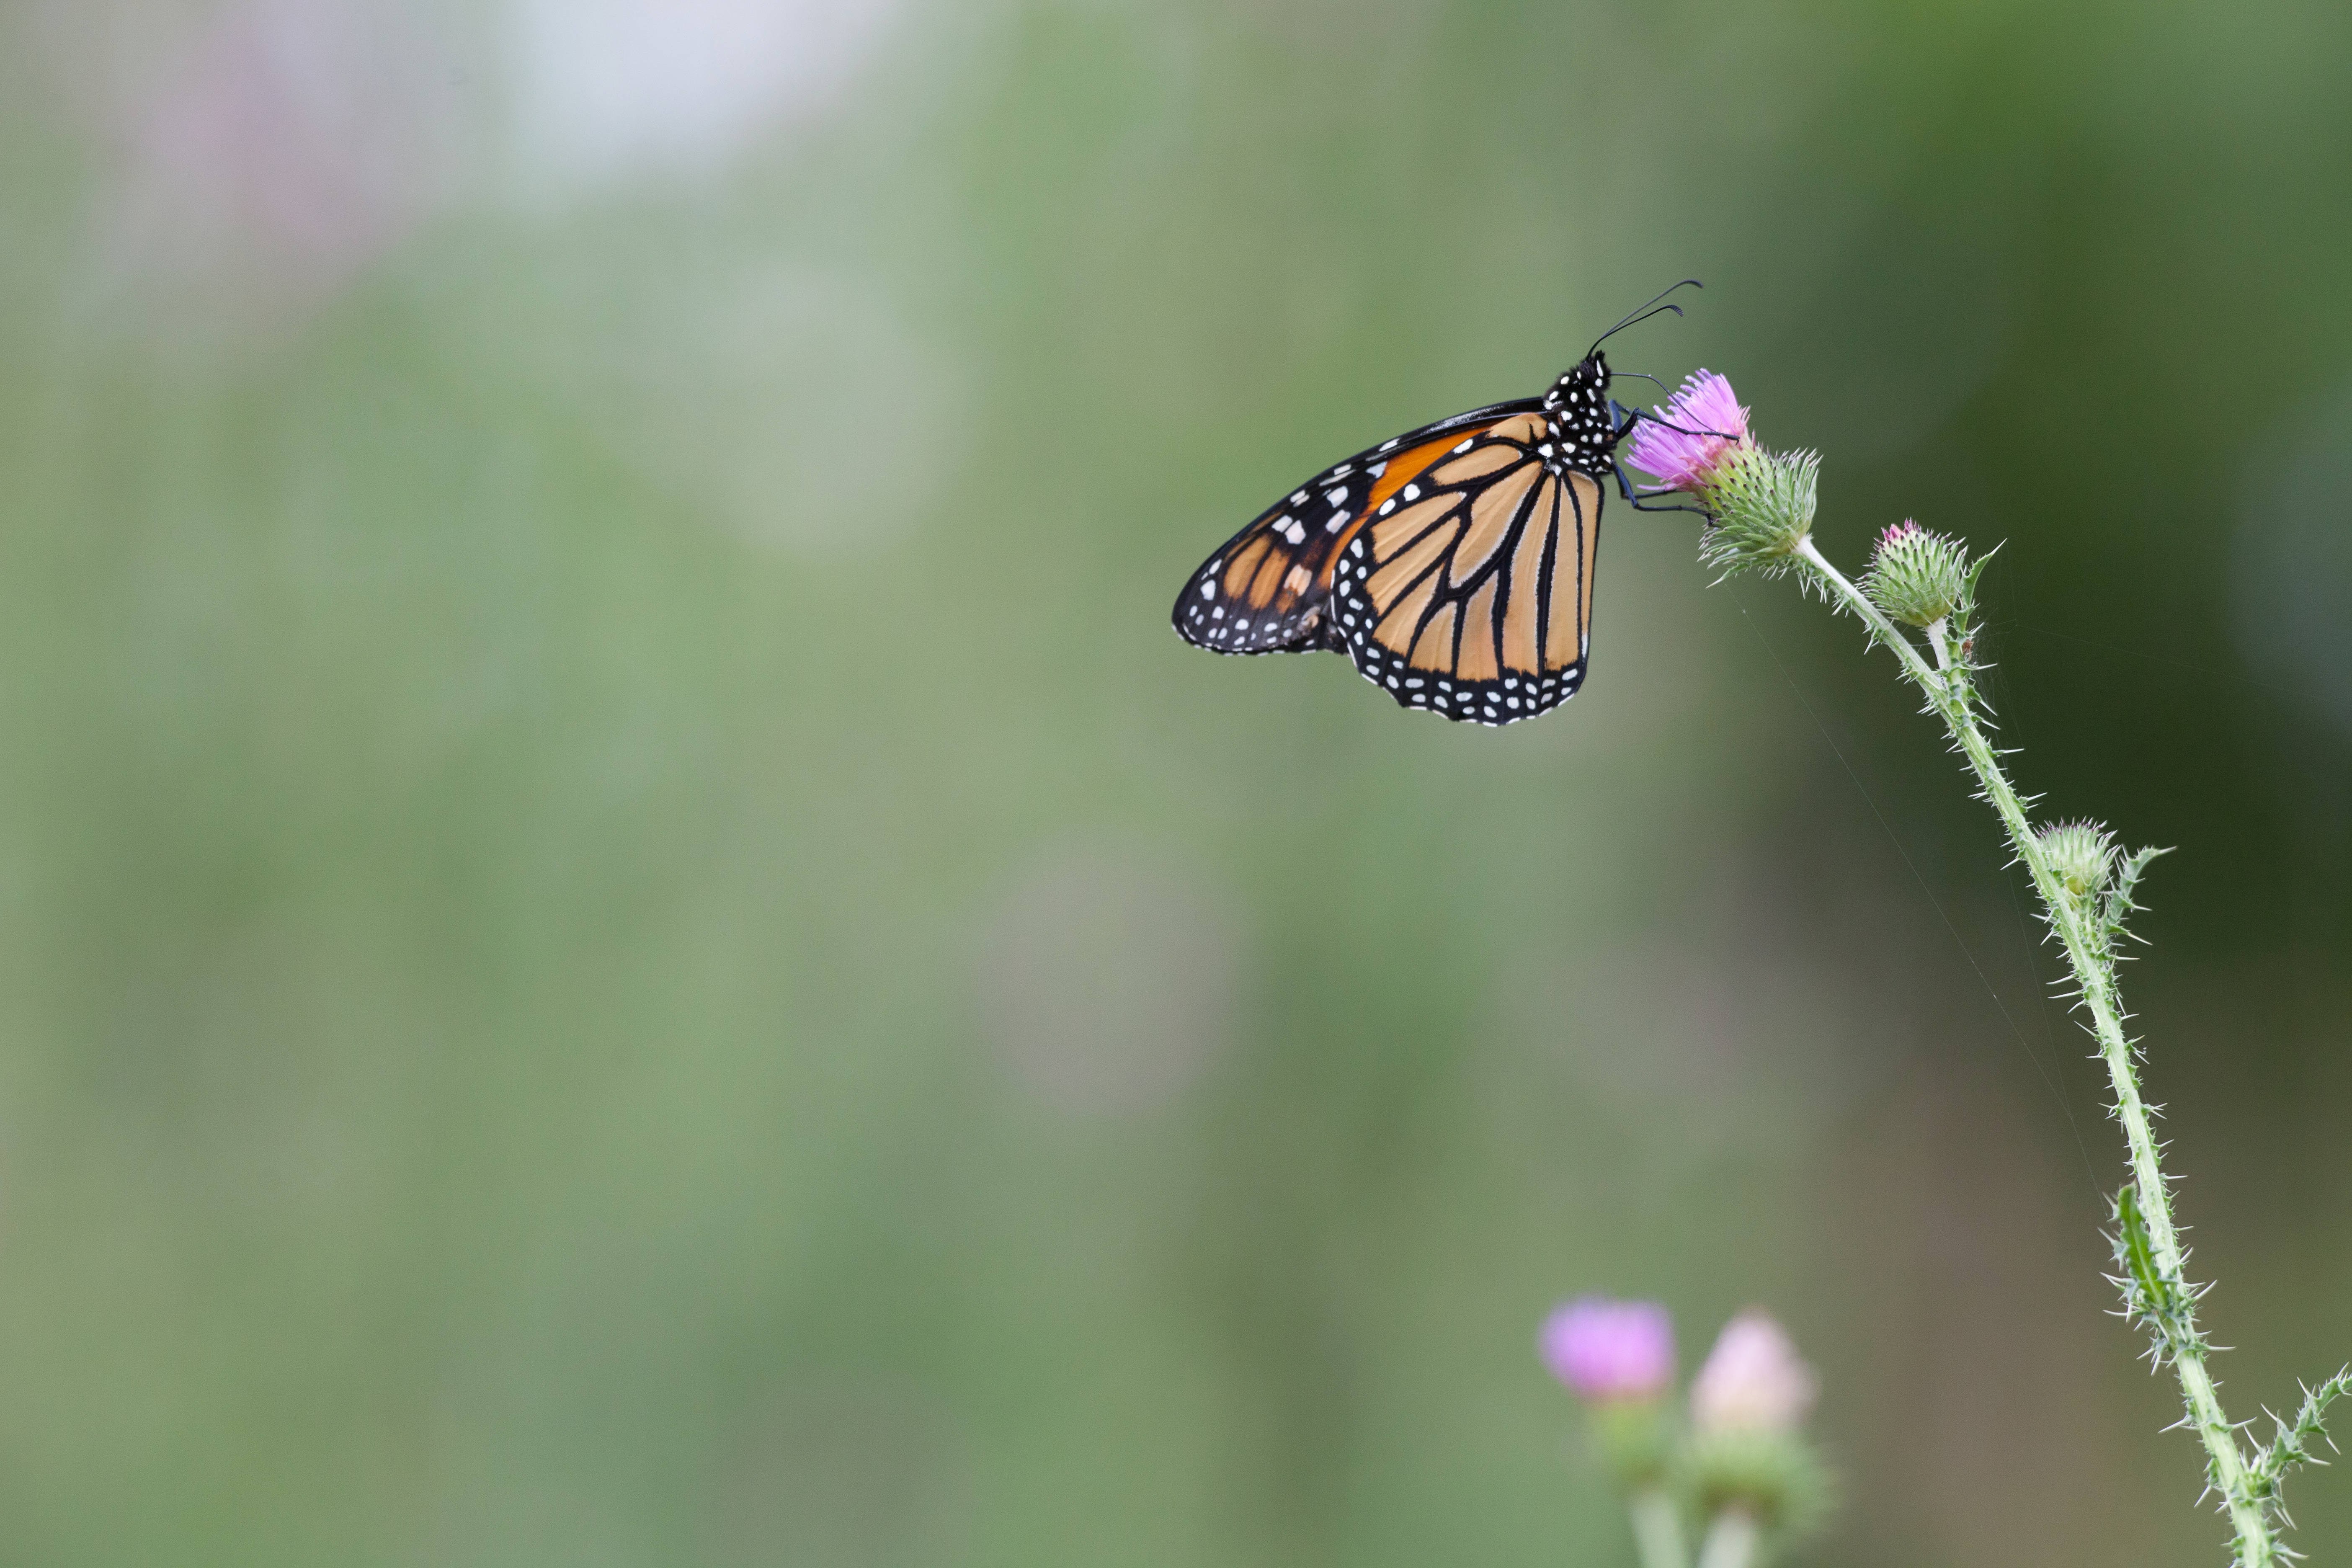 Adult Monarch Butterfly on thistle